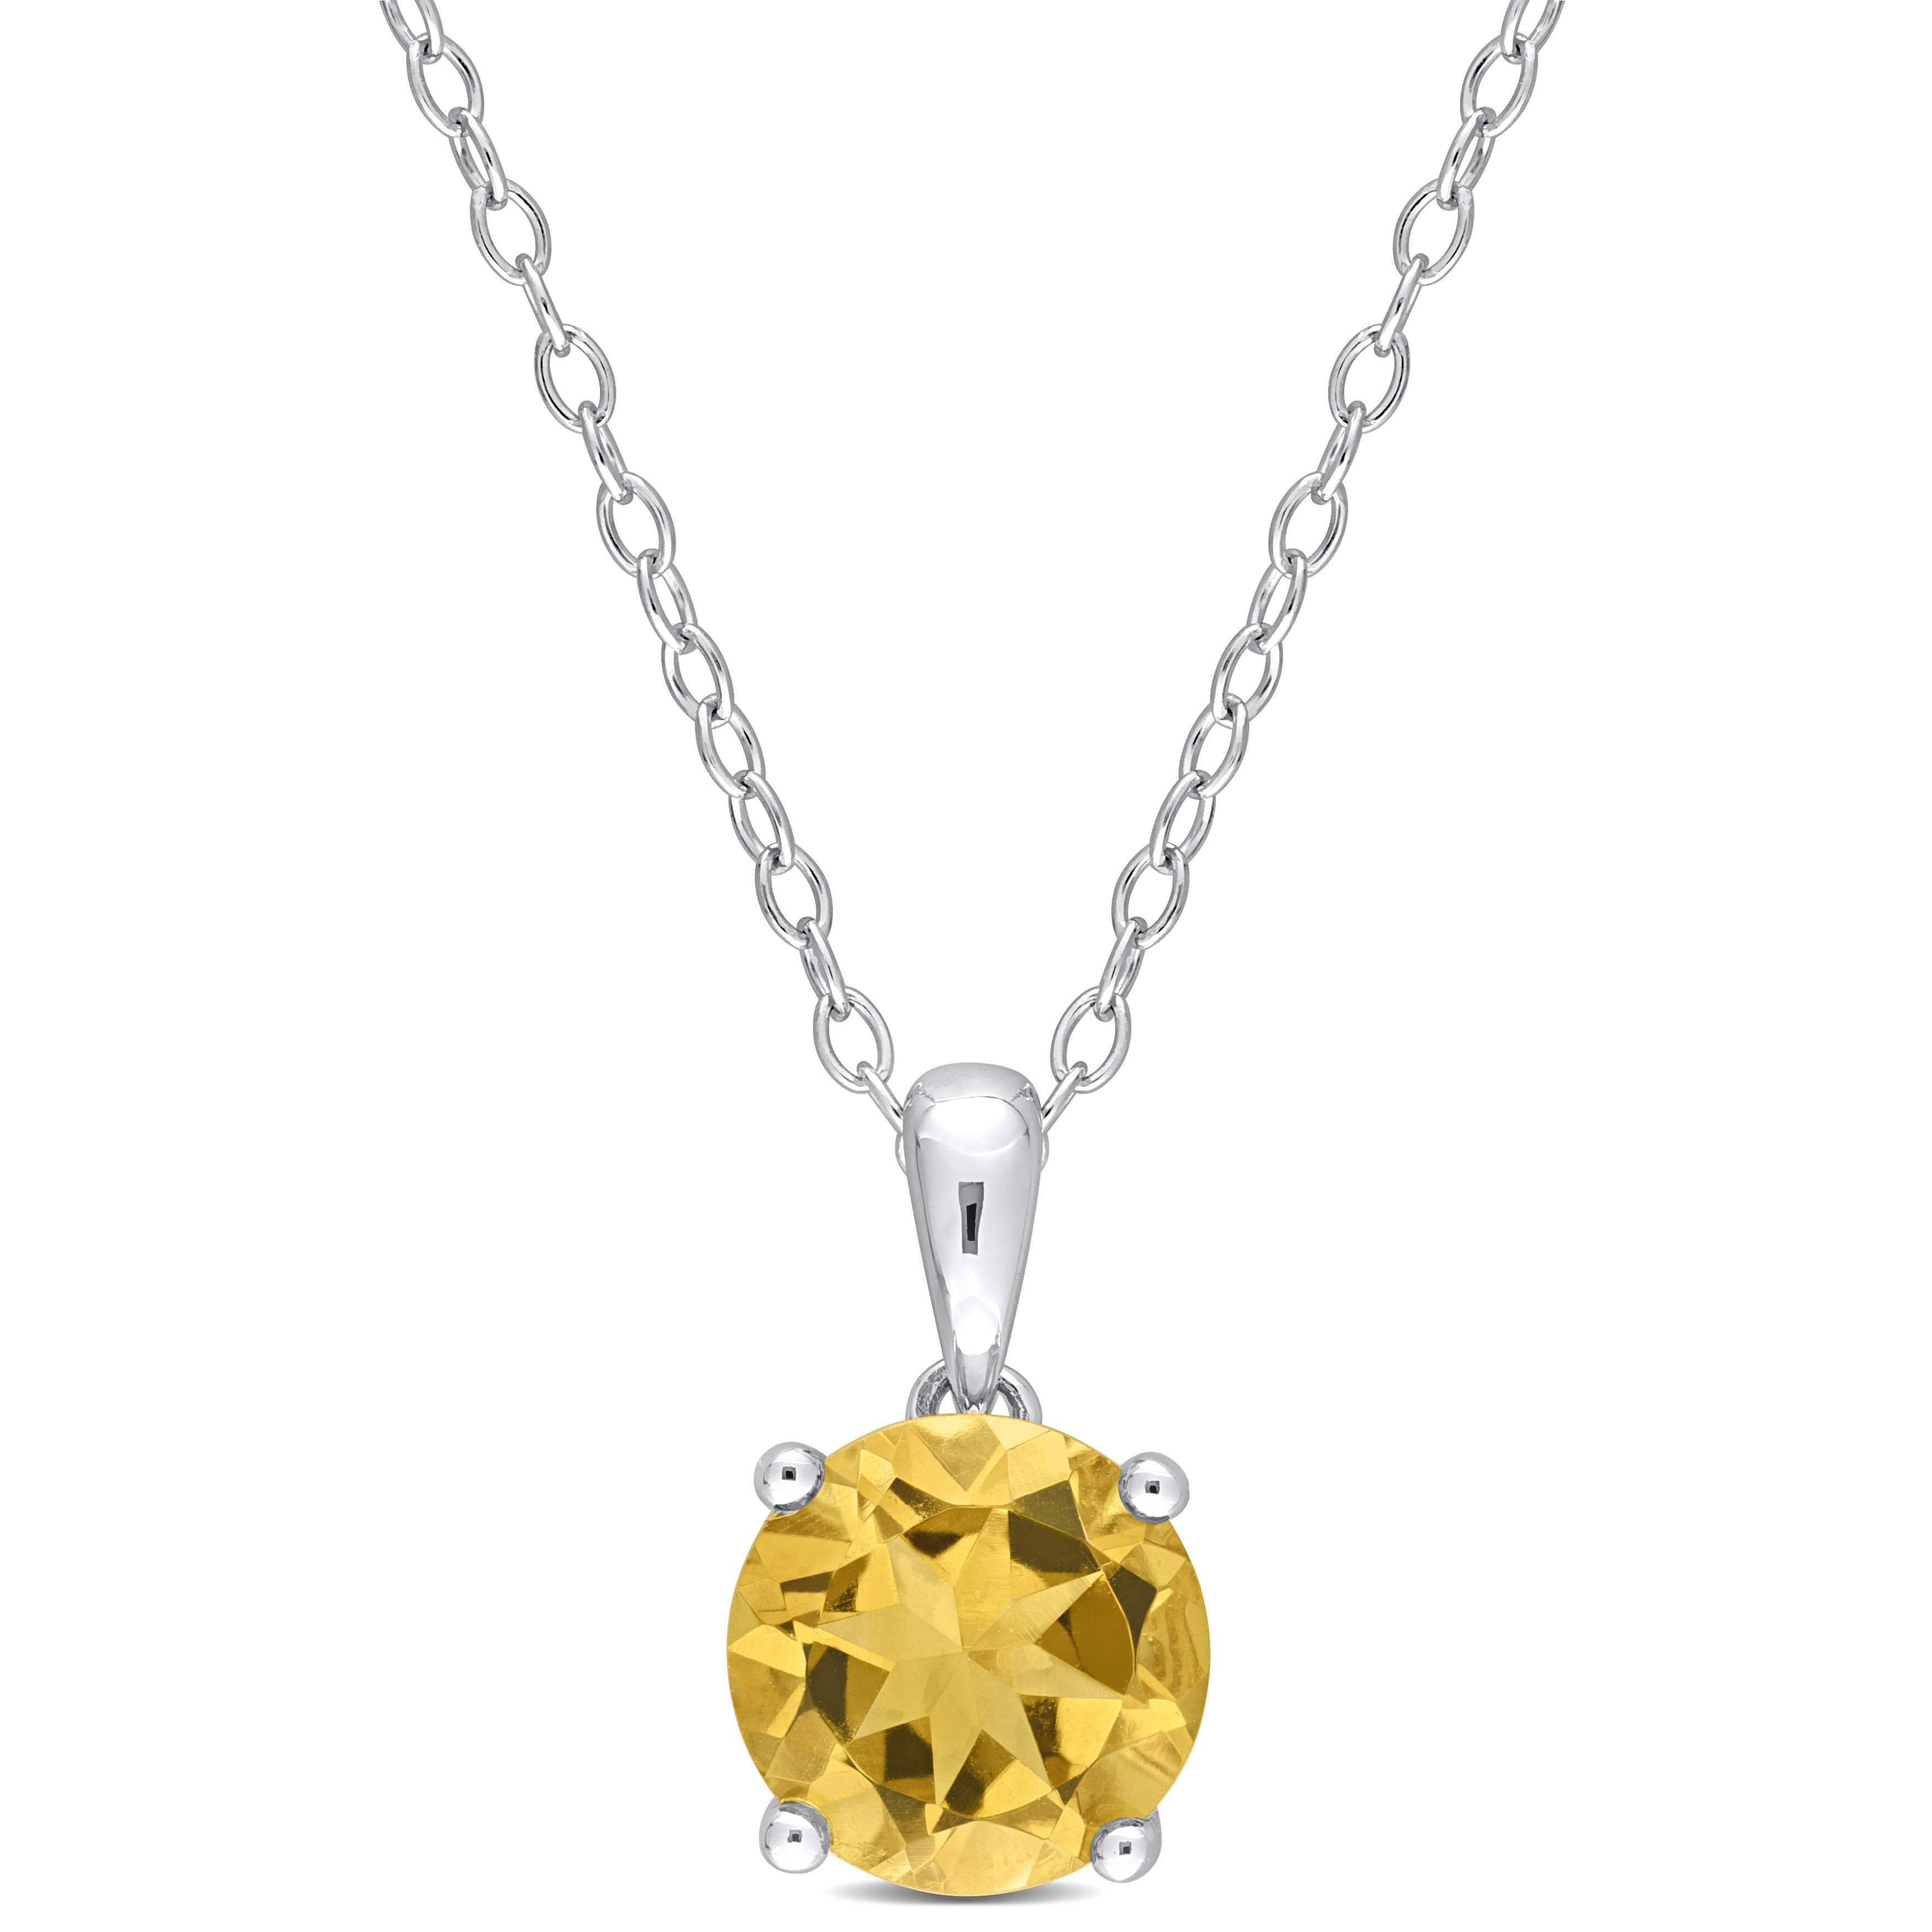 1 4/5 CT TGW Citrine Solitaire Heart Design Pendant with Chain in Sterling Silver - 18 in.